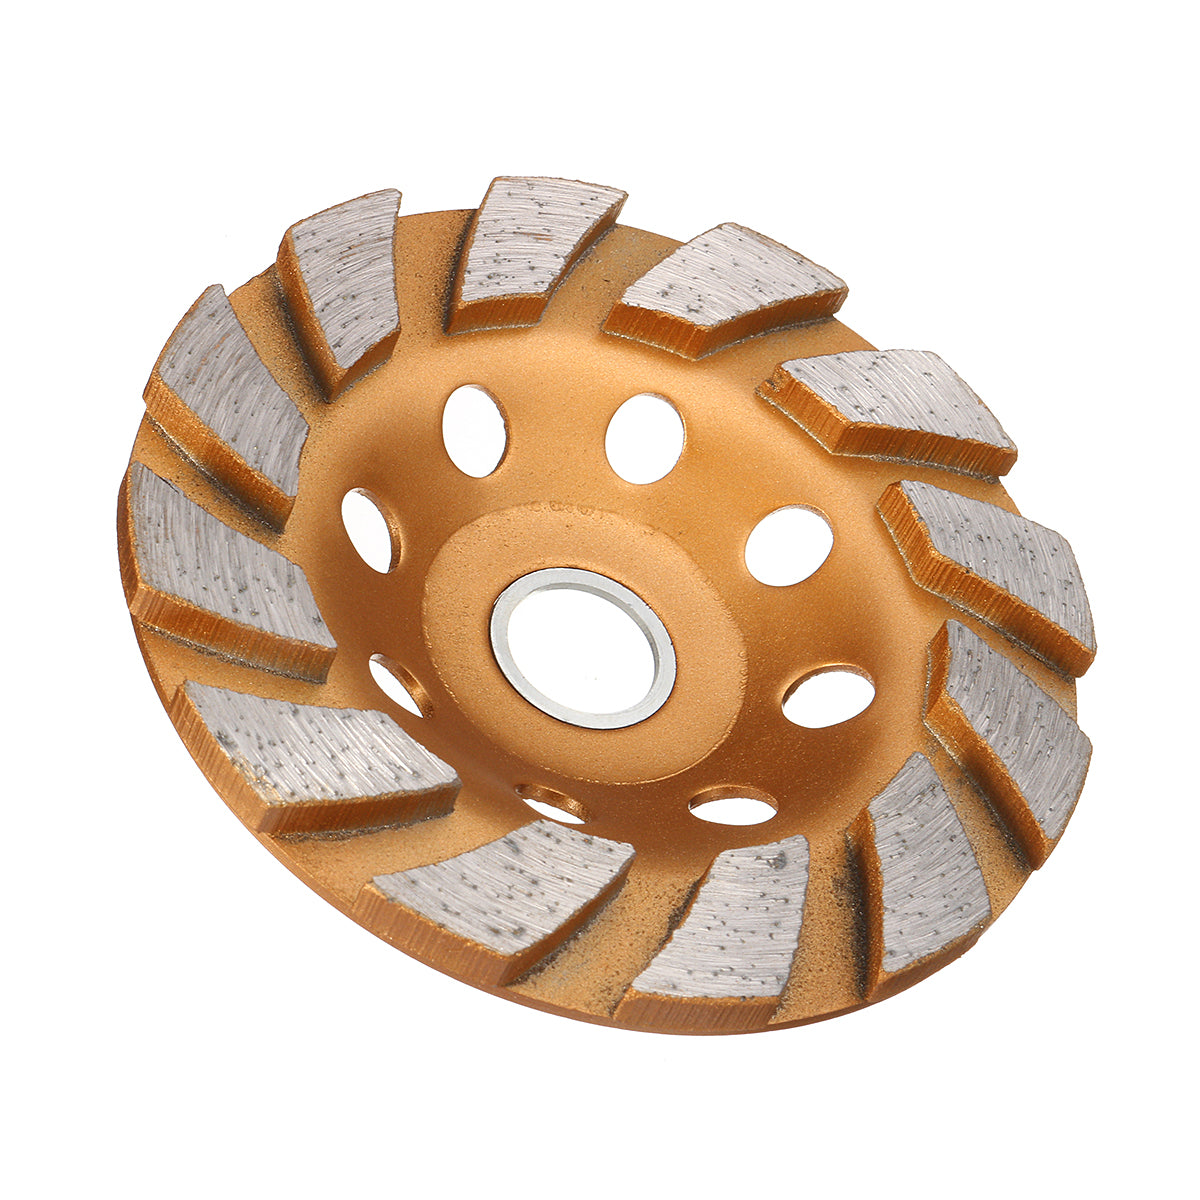 100mm Diamond Grinding Wheel Concrete Cup Wheel Disc for Concrete Granit Stone Grinding